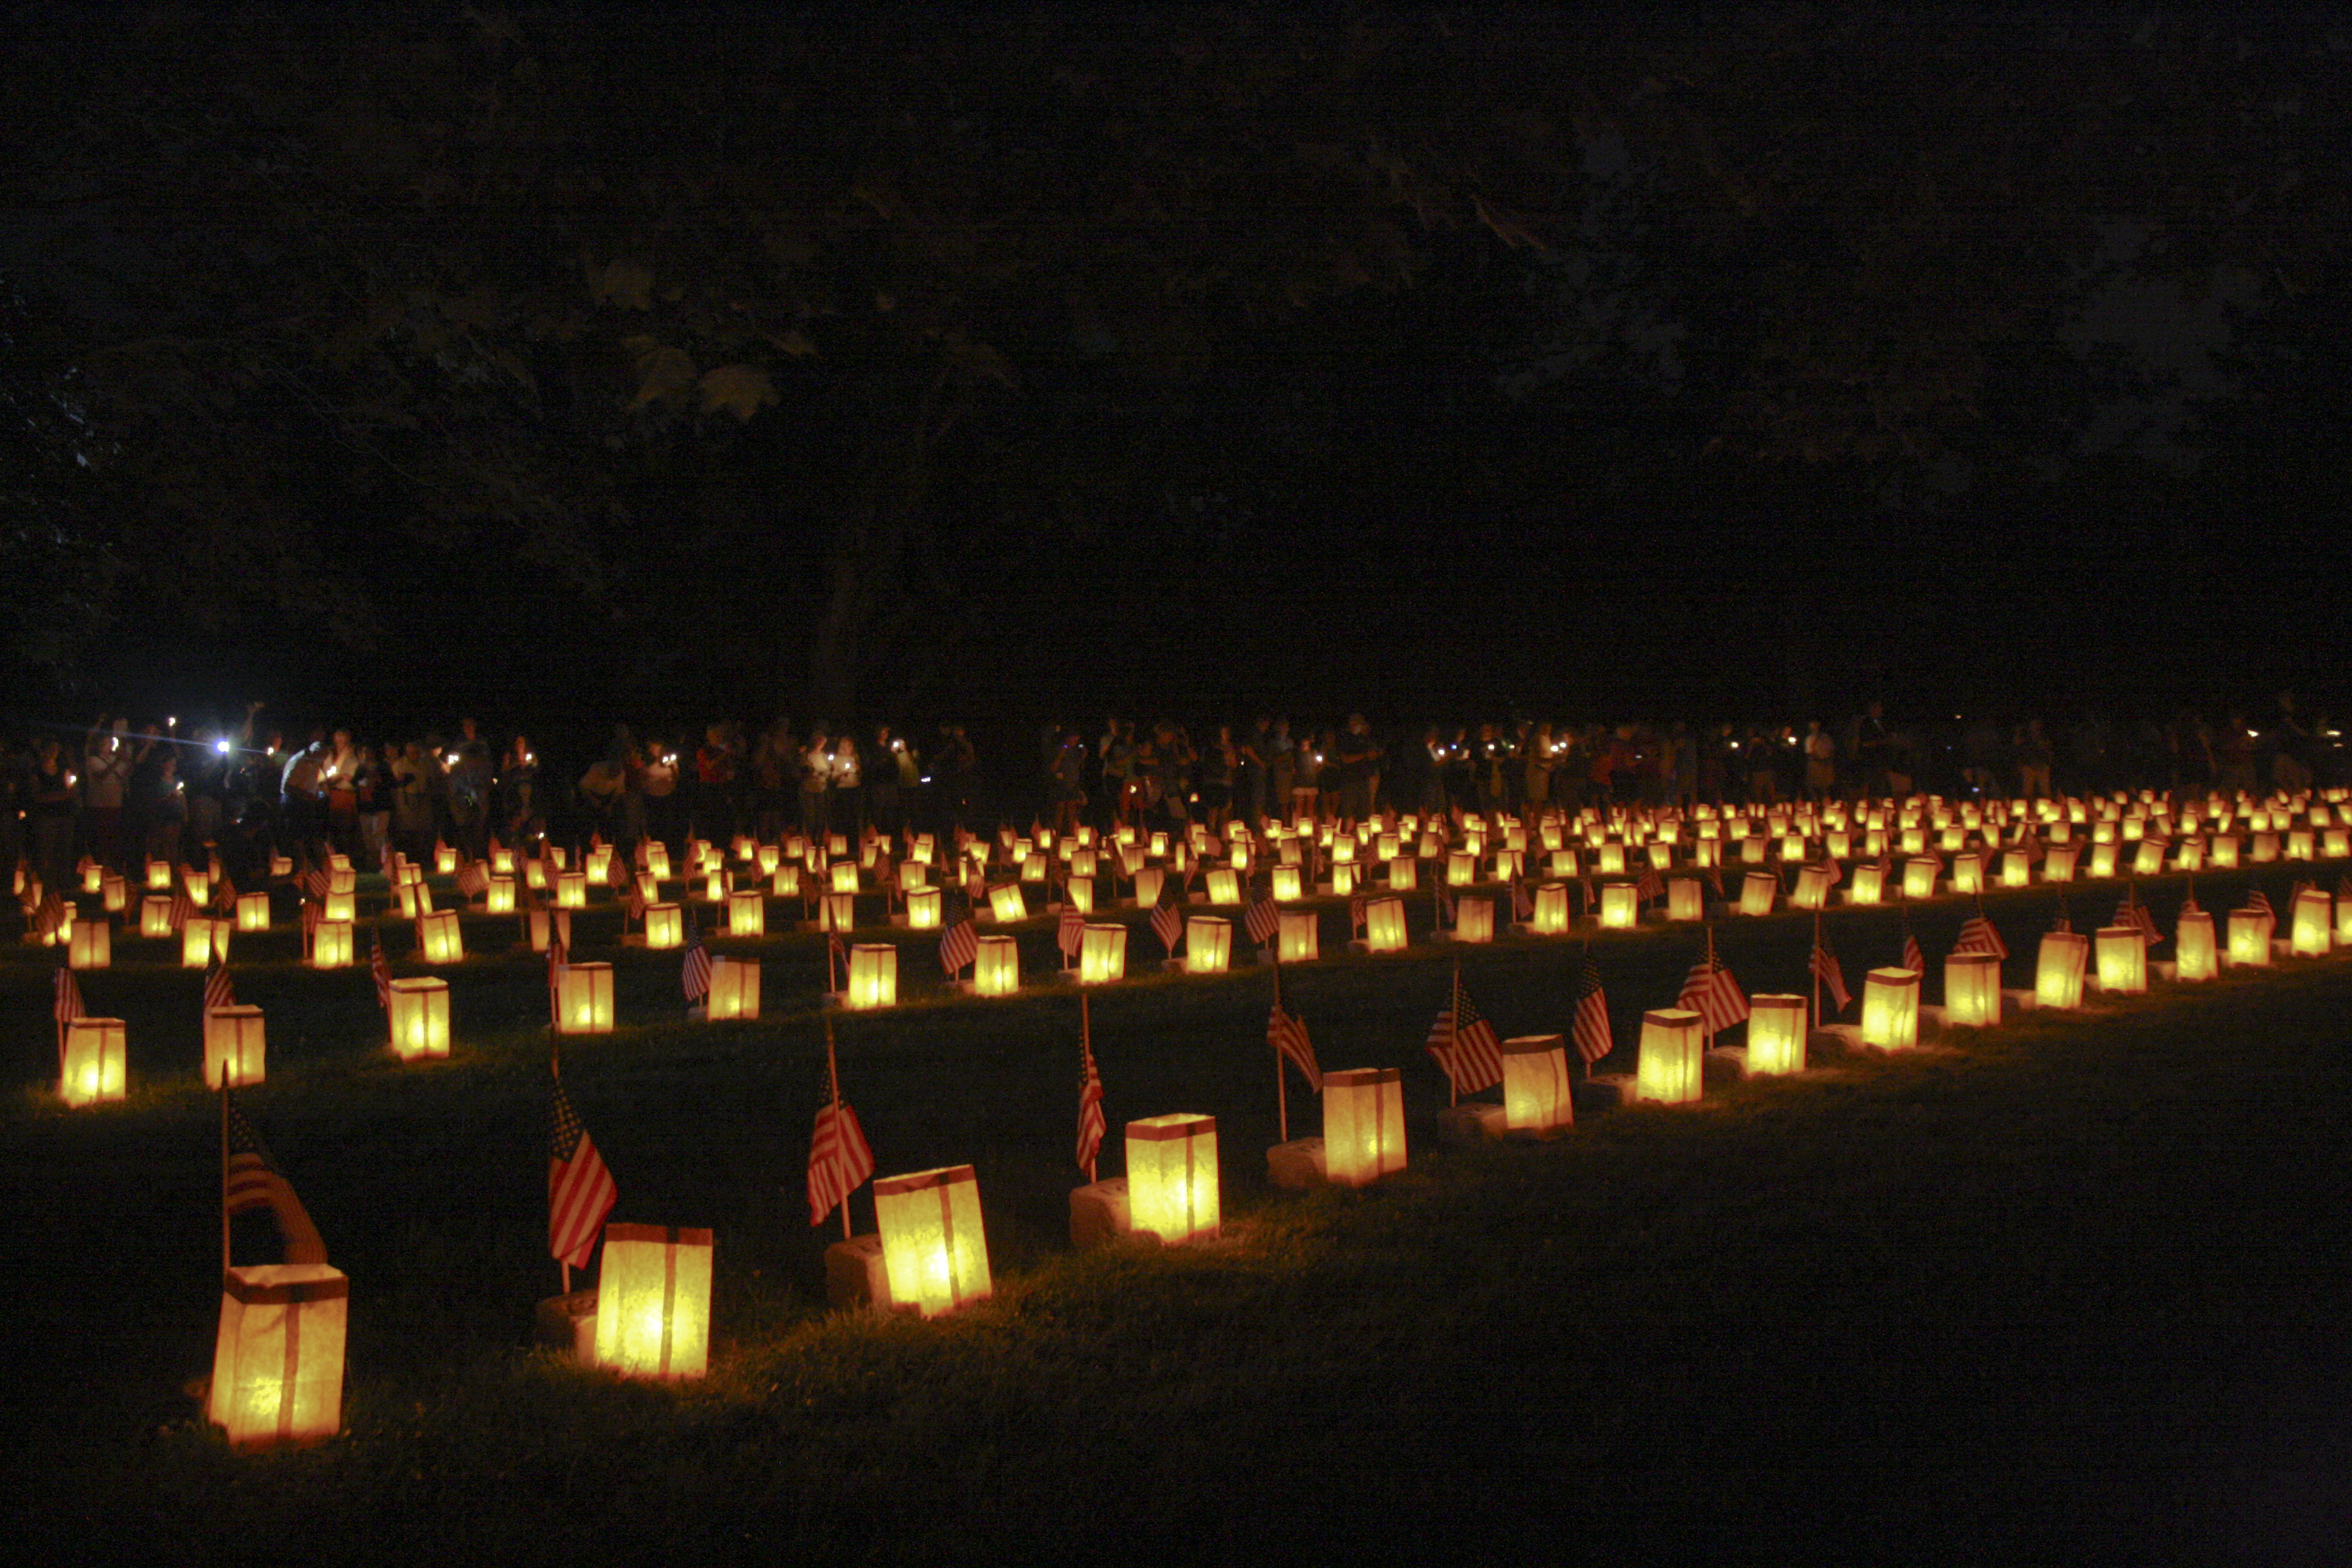 The Soldiers' National Cemetery during special illumination event